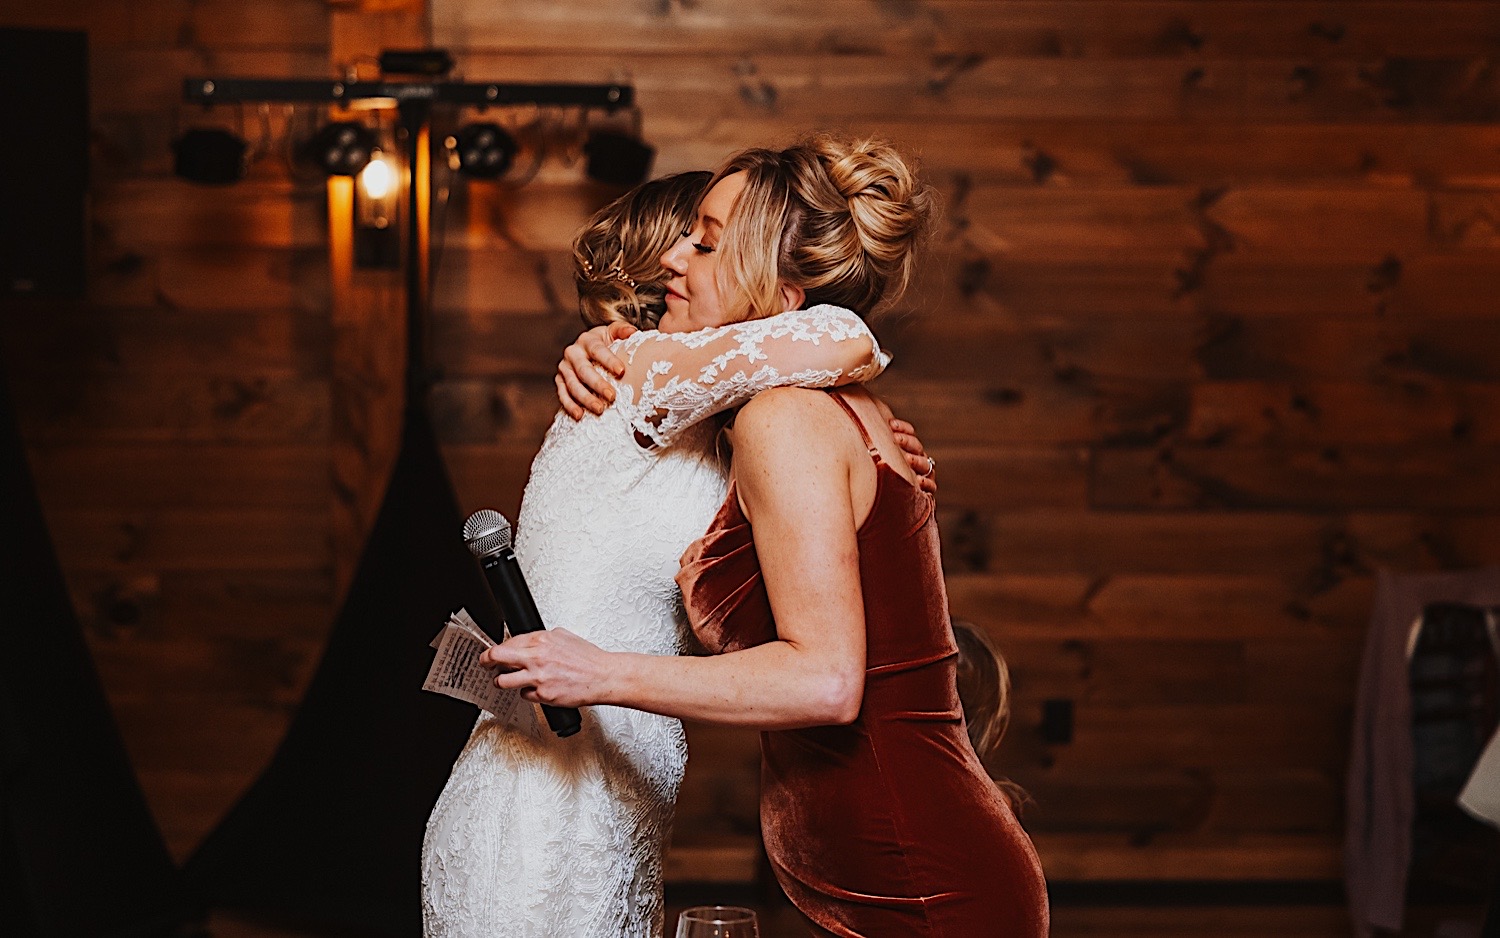 During an indoor wedding reception at Lake Bomoseen Lodge in Vermont, a bride hugs one of her bridesmaids following a speech from the bridesmaid